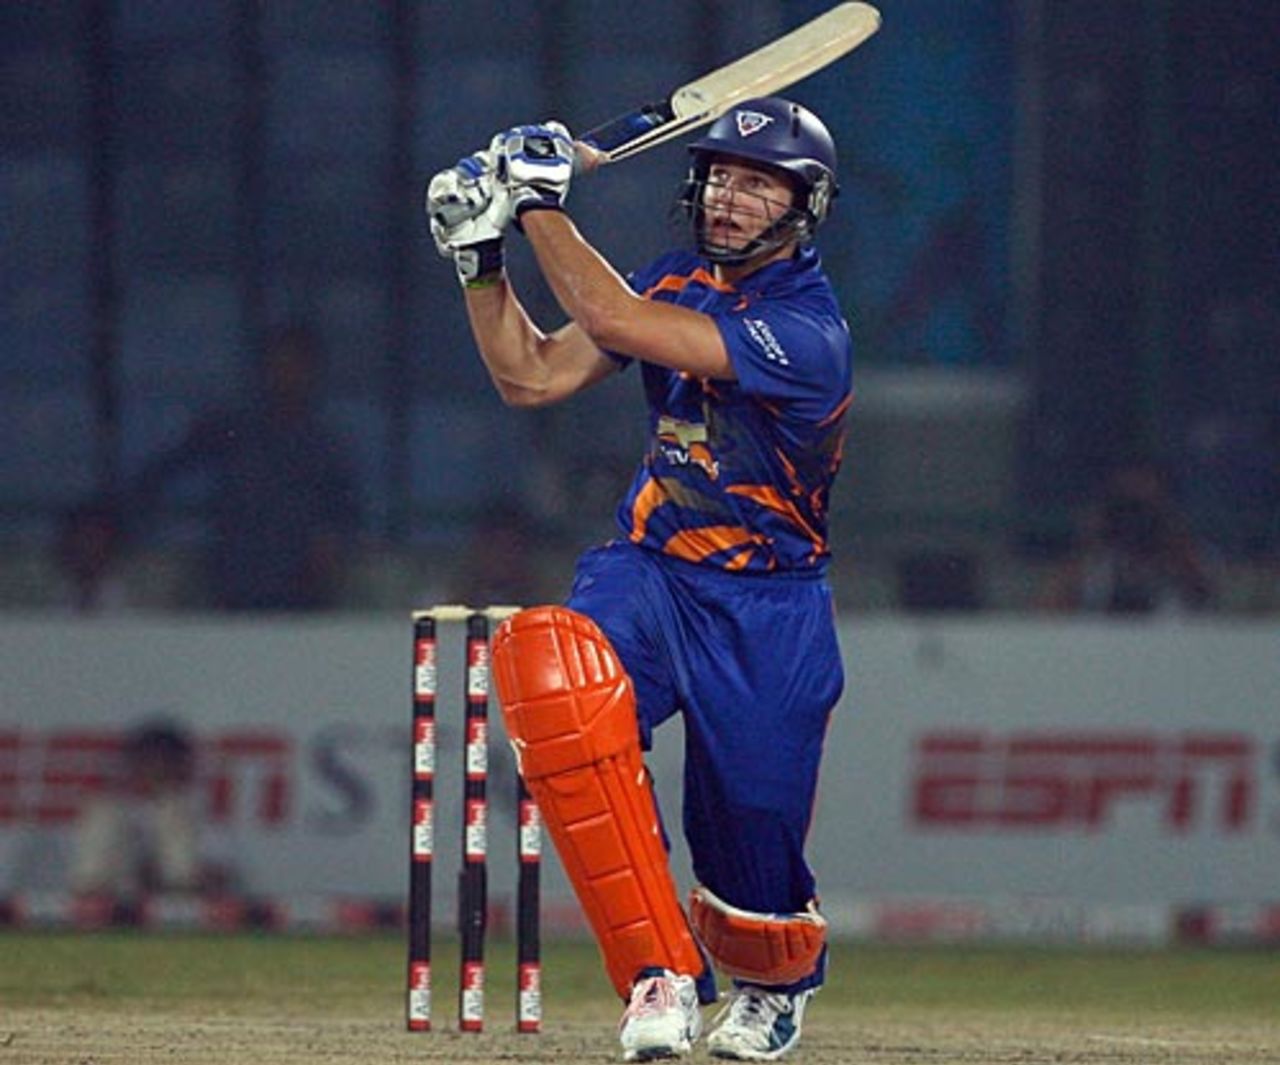 Rilee Rossouw swings over the leg side, Eagles v Sussex, Champions League Twenty20, October 13, 2009